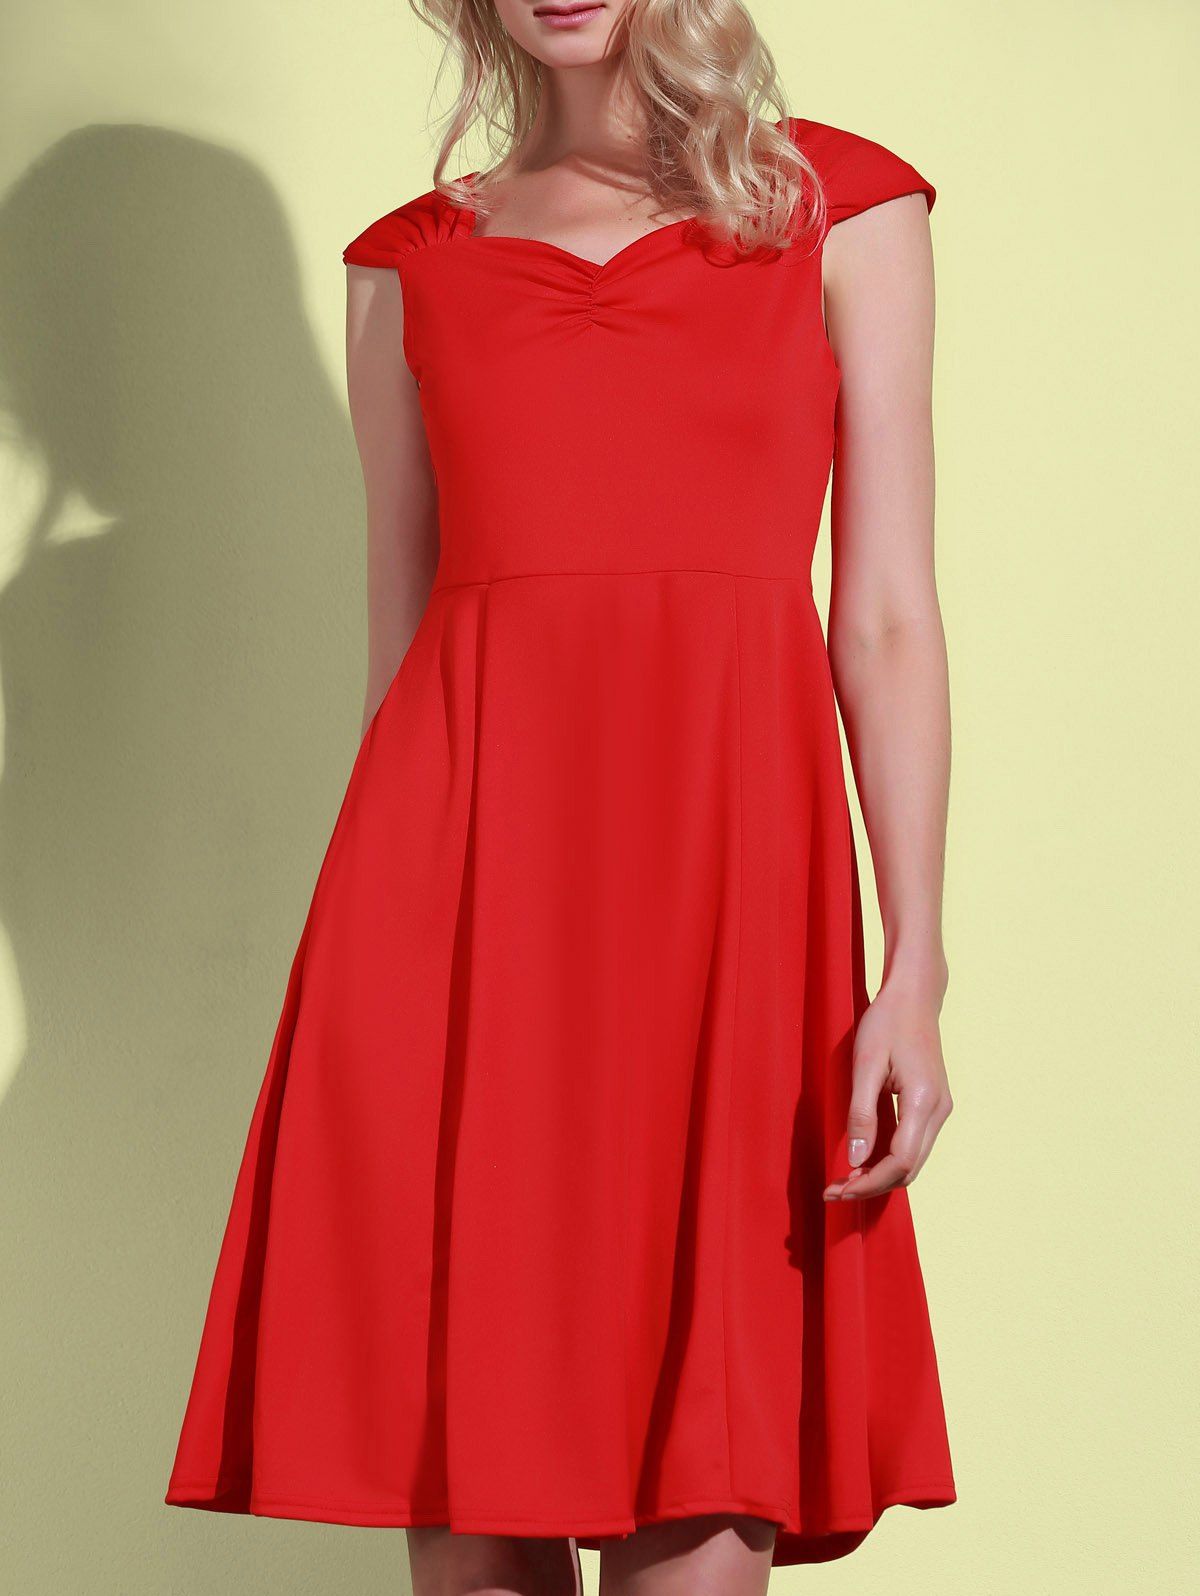 Red Retro Sweetheart Neck Solid Color Sleeveless Dress For ...
